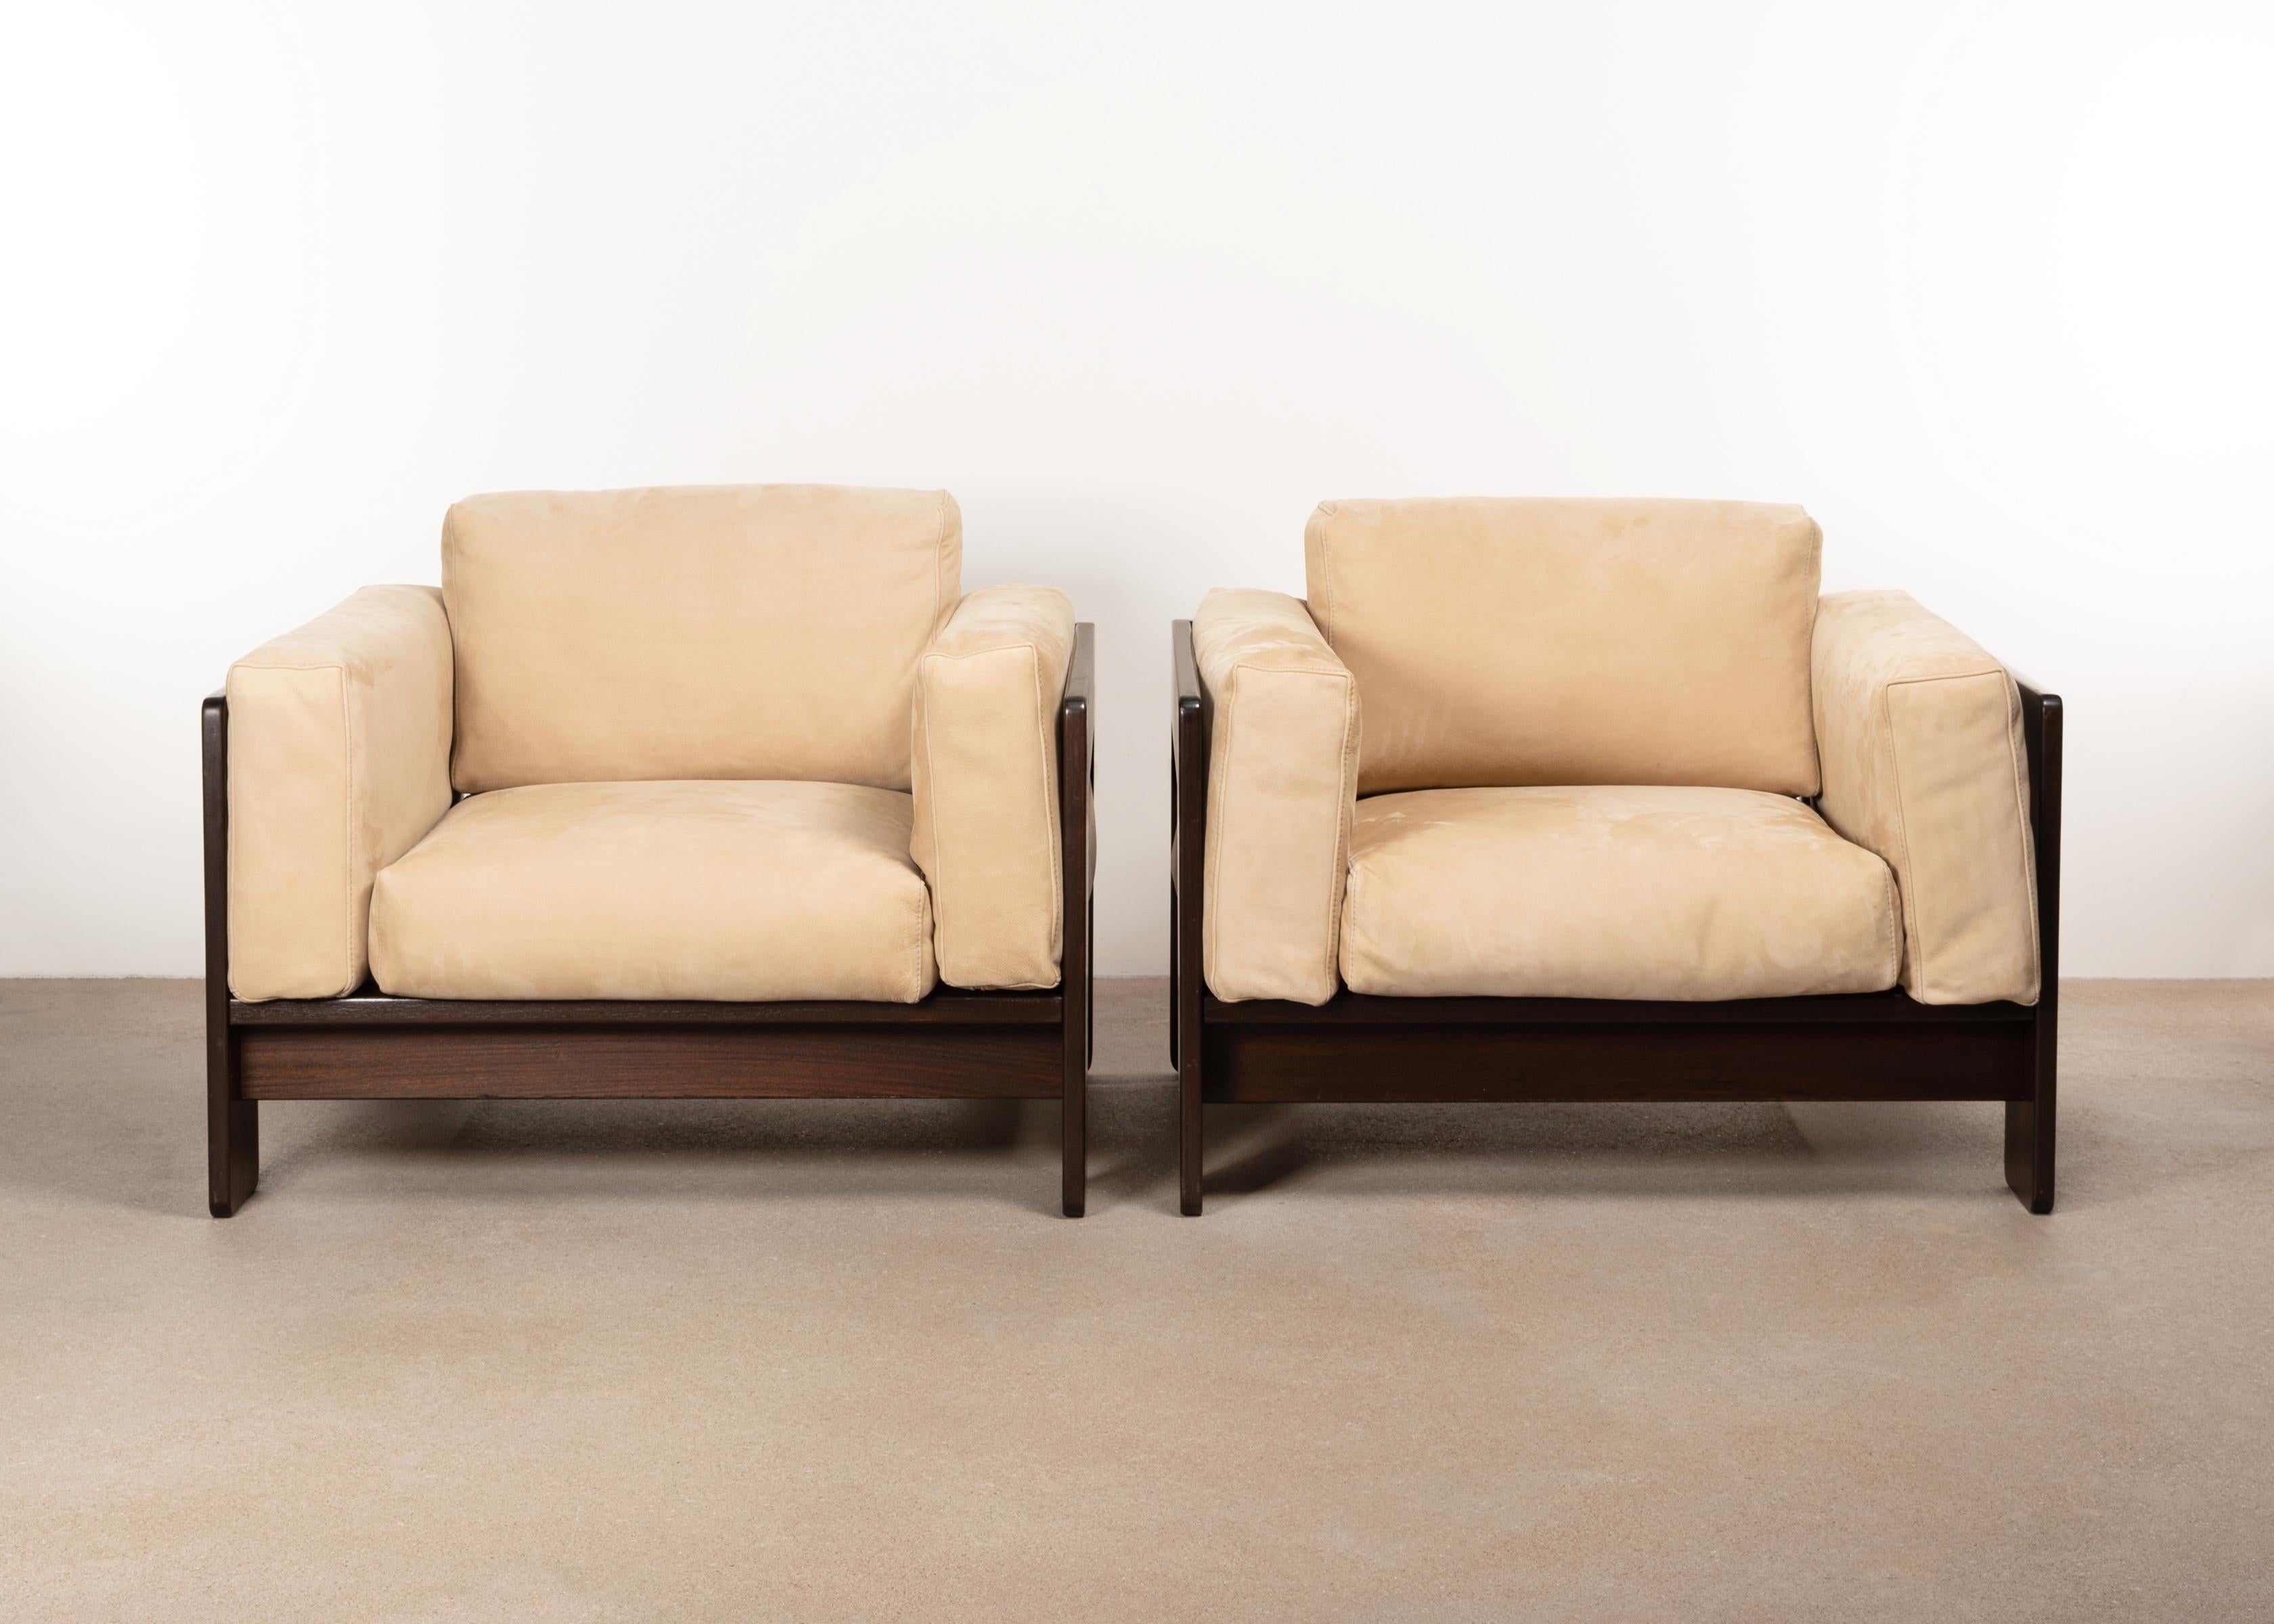 Italian Tobia Scarpa Bastiano Lounge Chairs in Walnut and Beige Suede Leather for Knoll